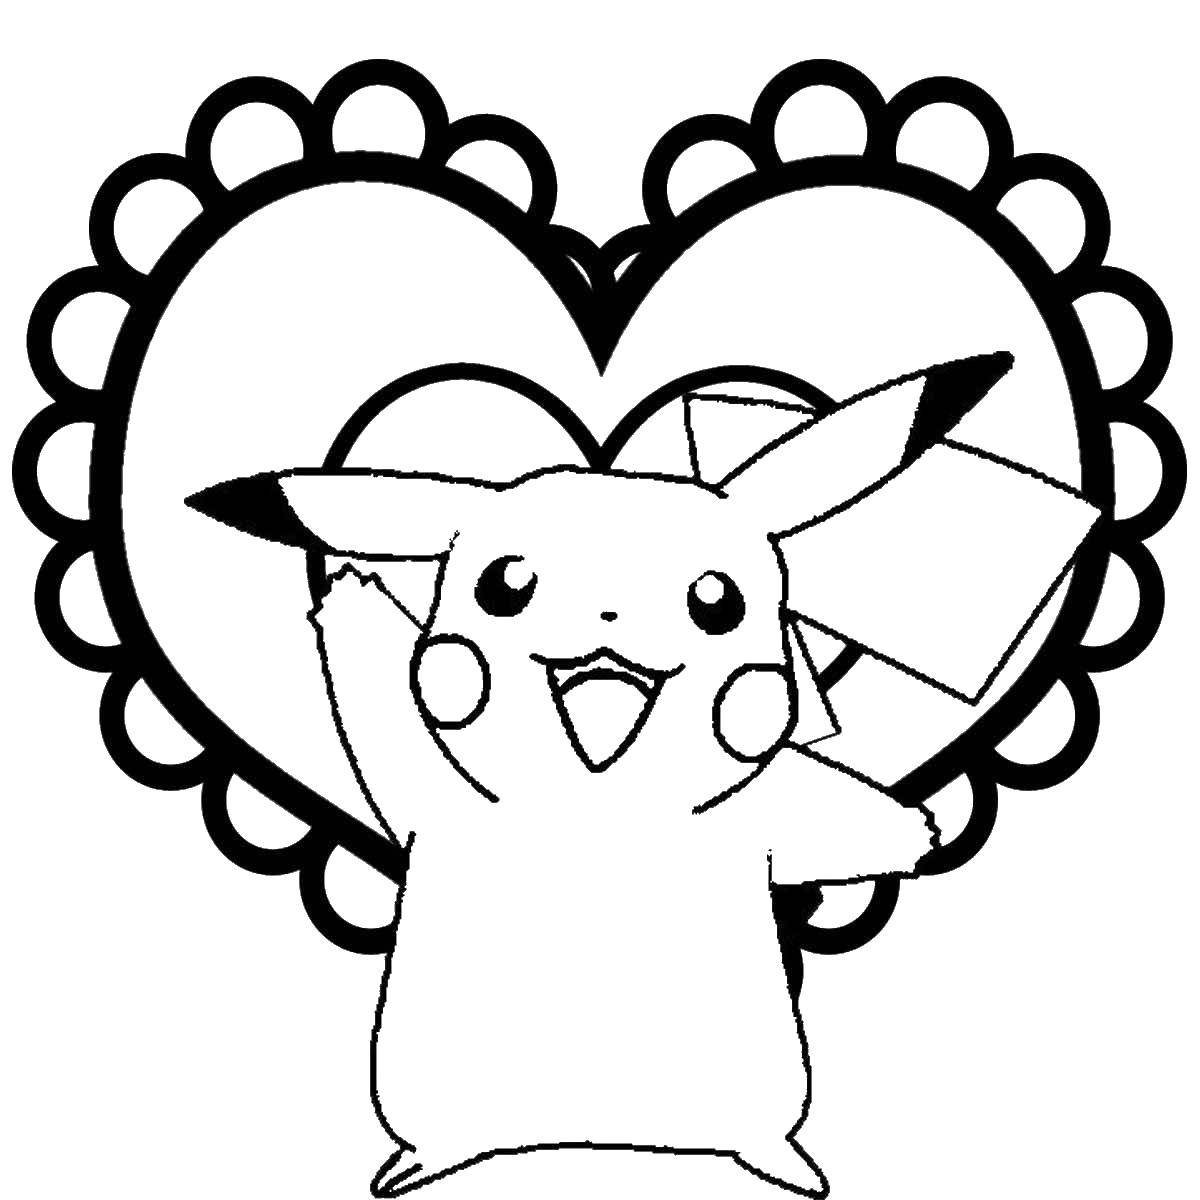 Coloring Pokemon Pikachu in love. Category Valentines day. Tags:  Valentines day, love, heart.